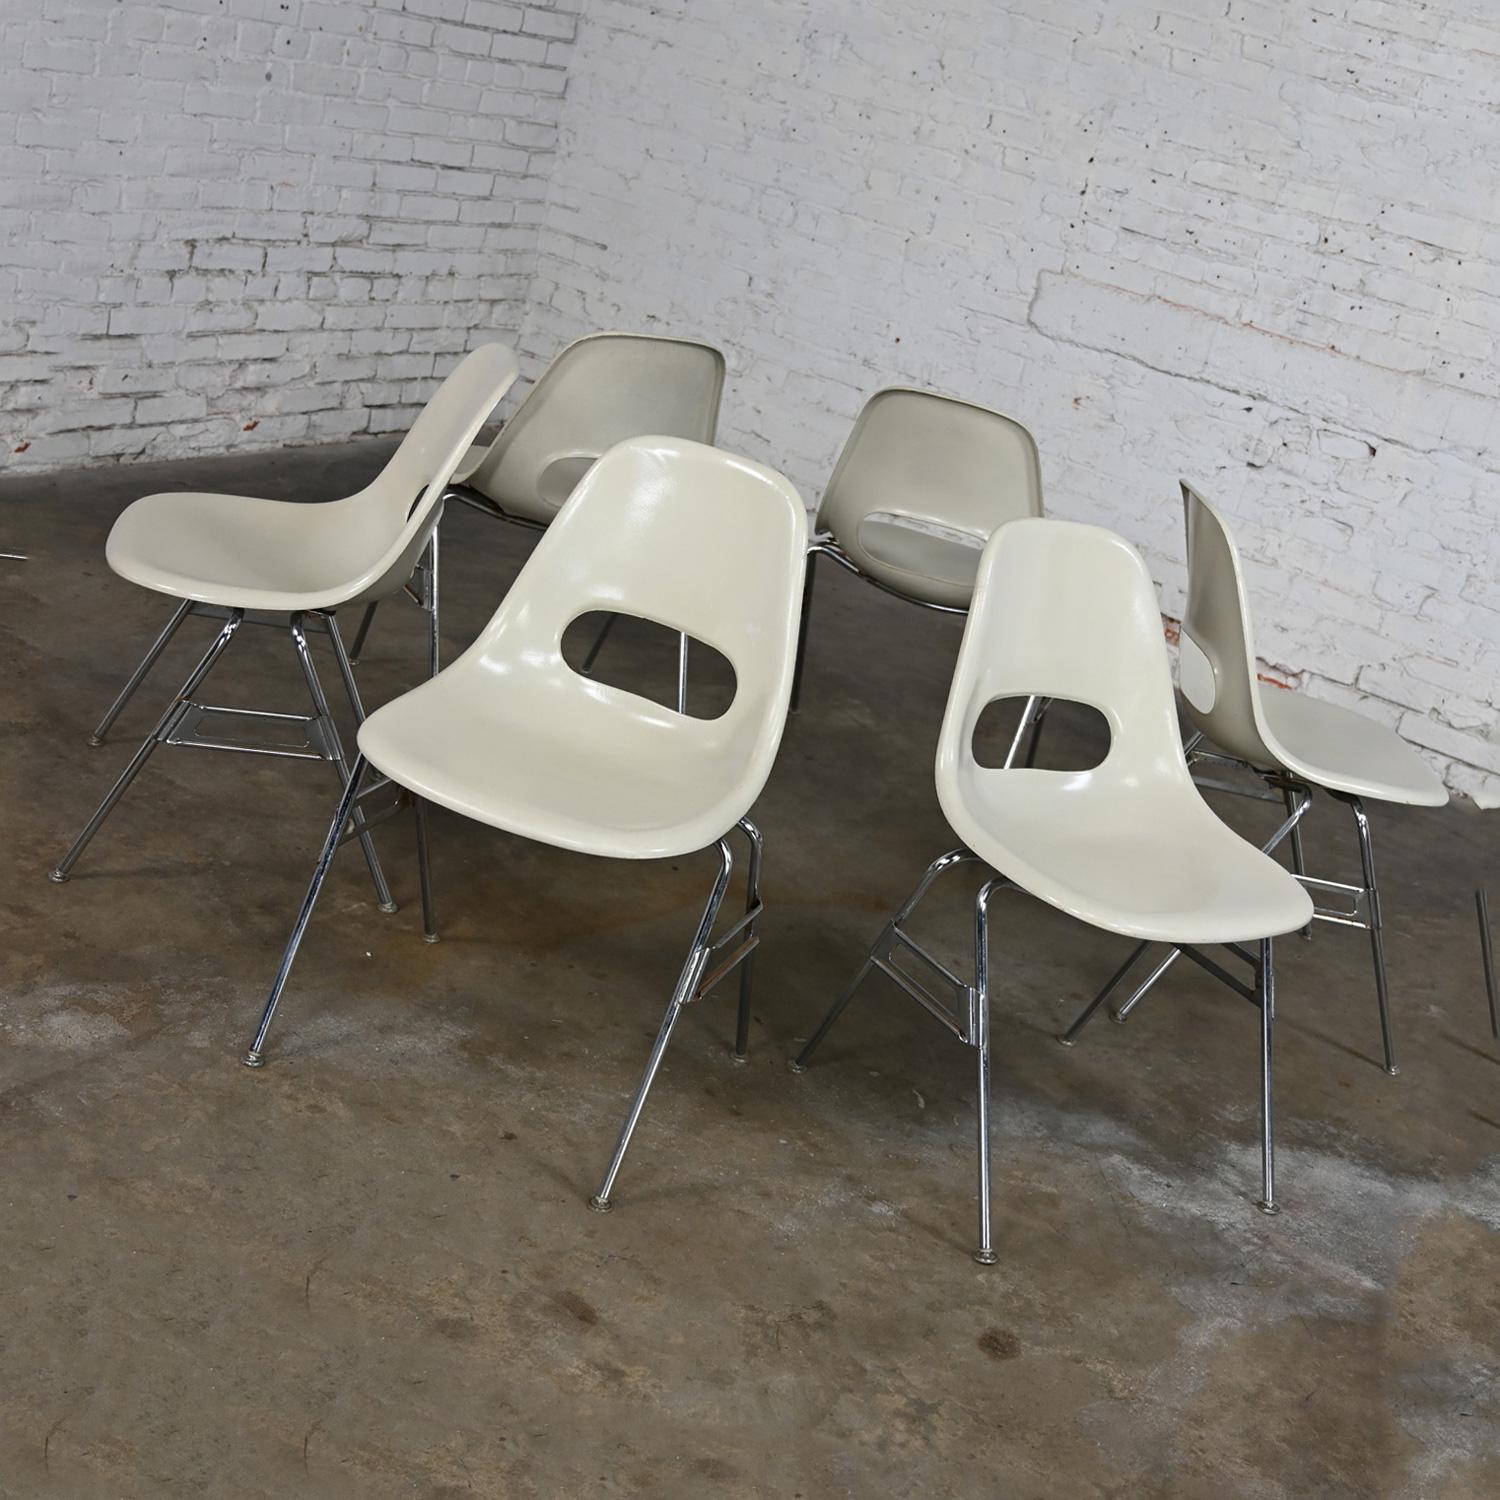 Handsome vintage Mid-Century Modern Krueger International white molded fiberglass shells & chrome tube base stacking chairs, set of 6. Beautiful condition, keeping in mind that these are vintage and not new so will have signs of use and wear even if